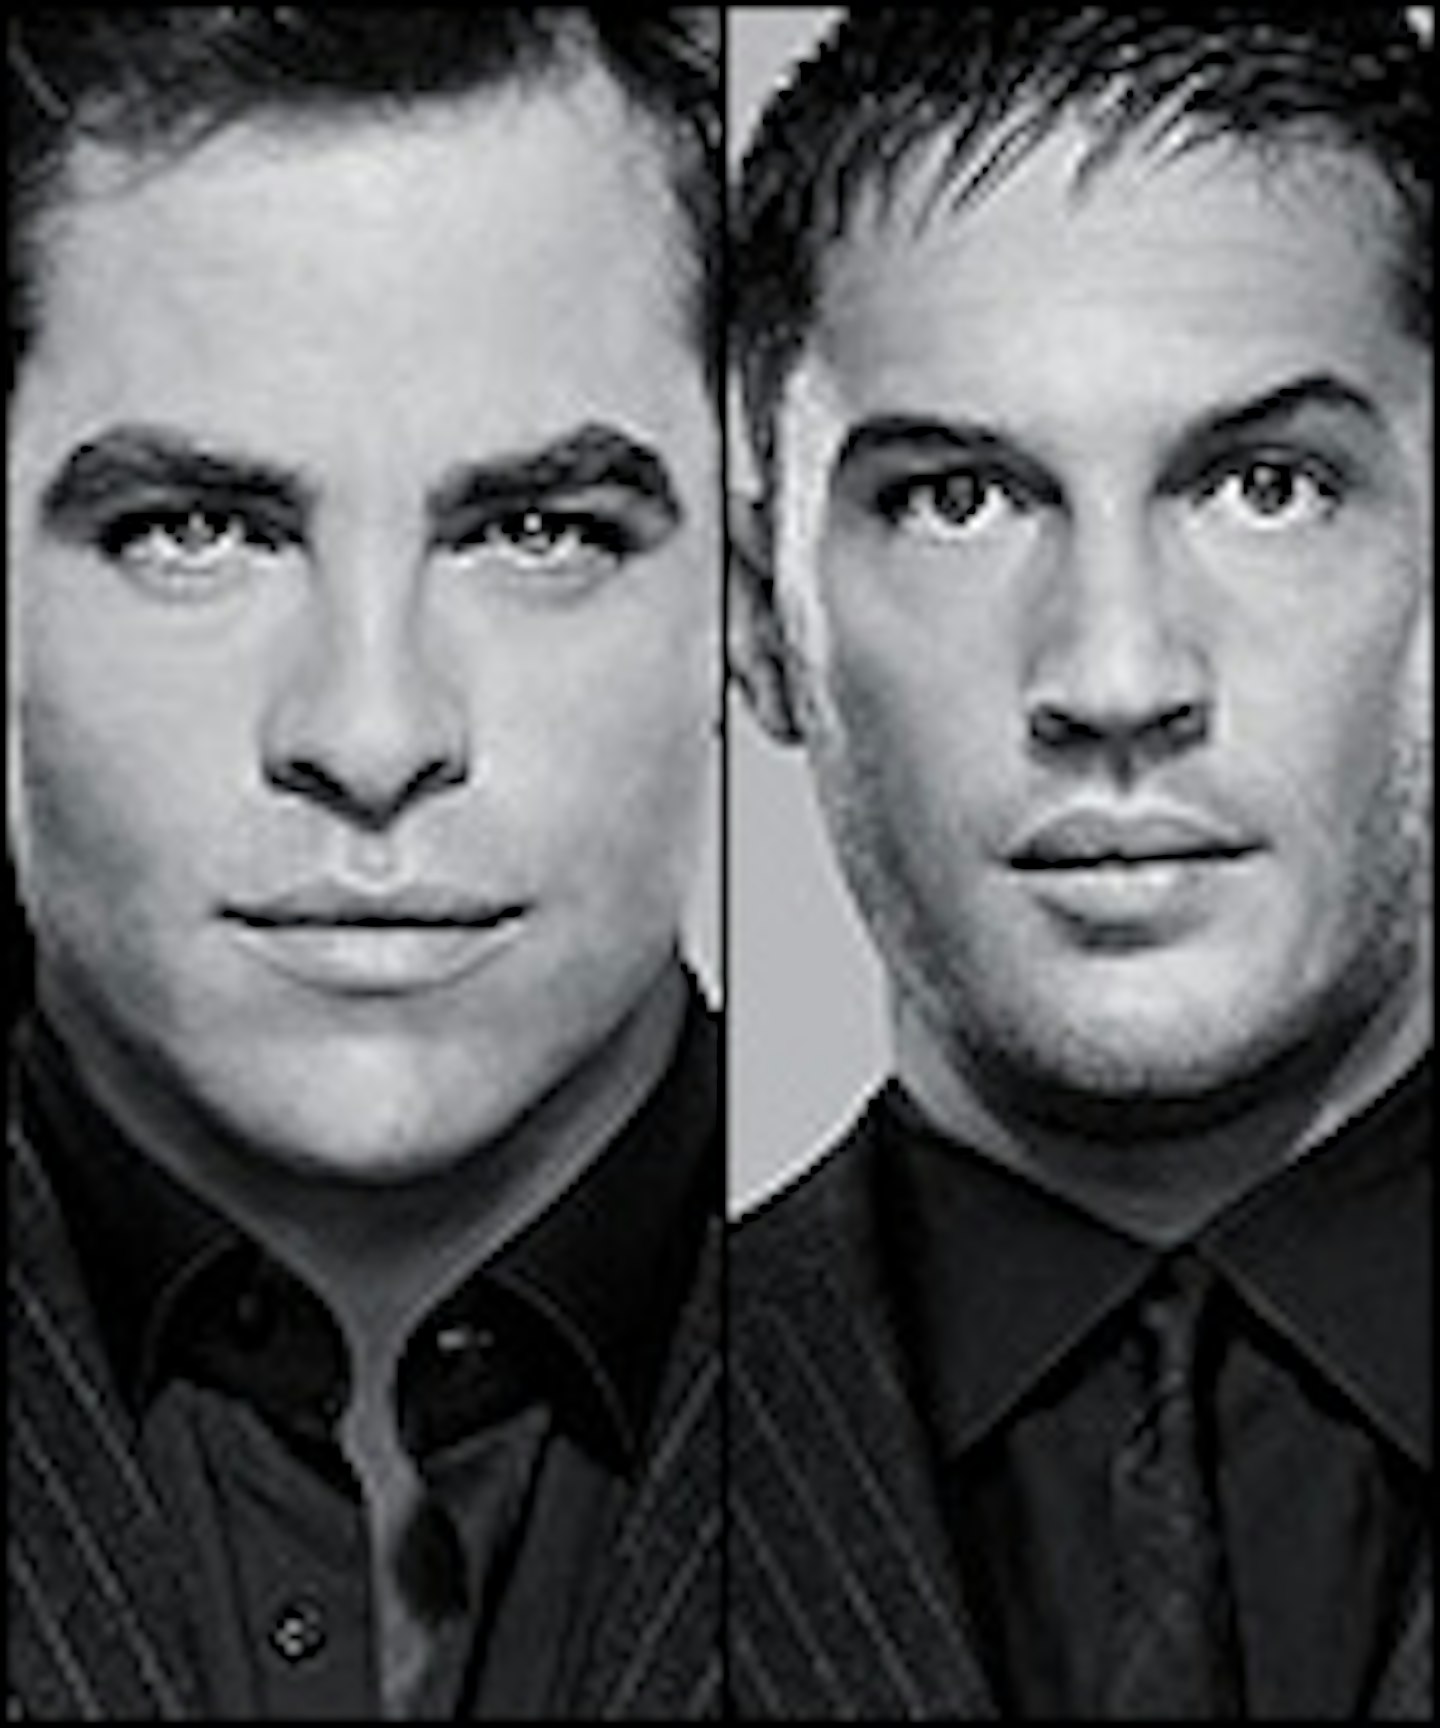 This Means War Trailer Blows Up Online